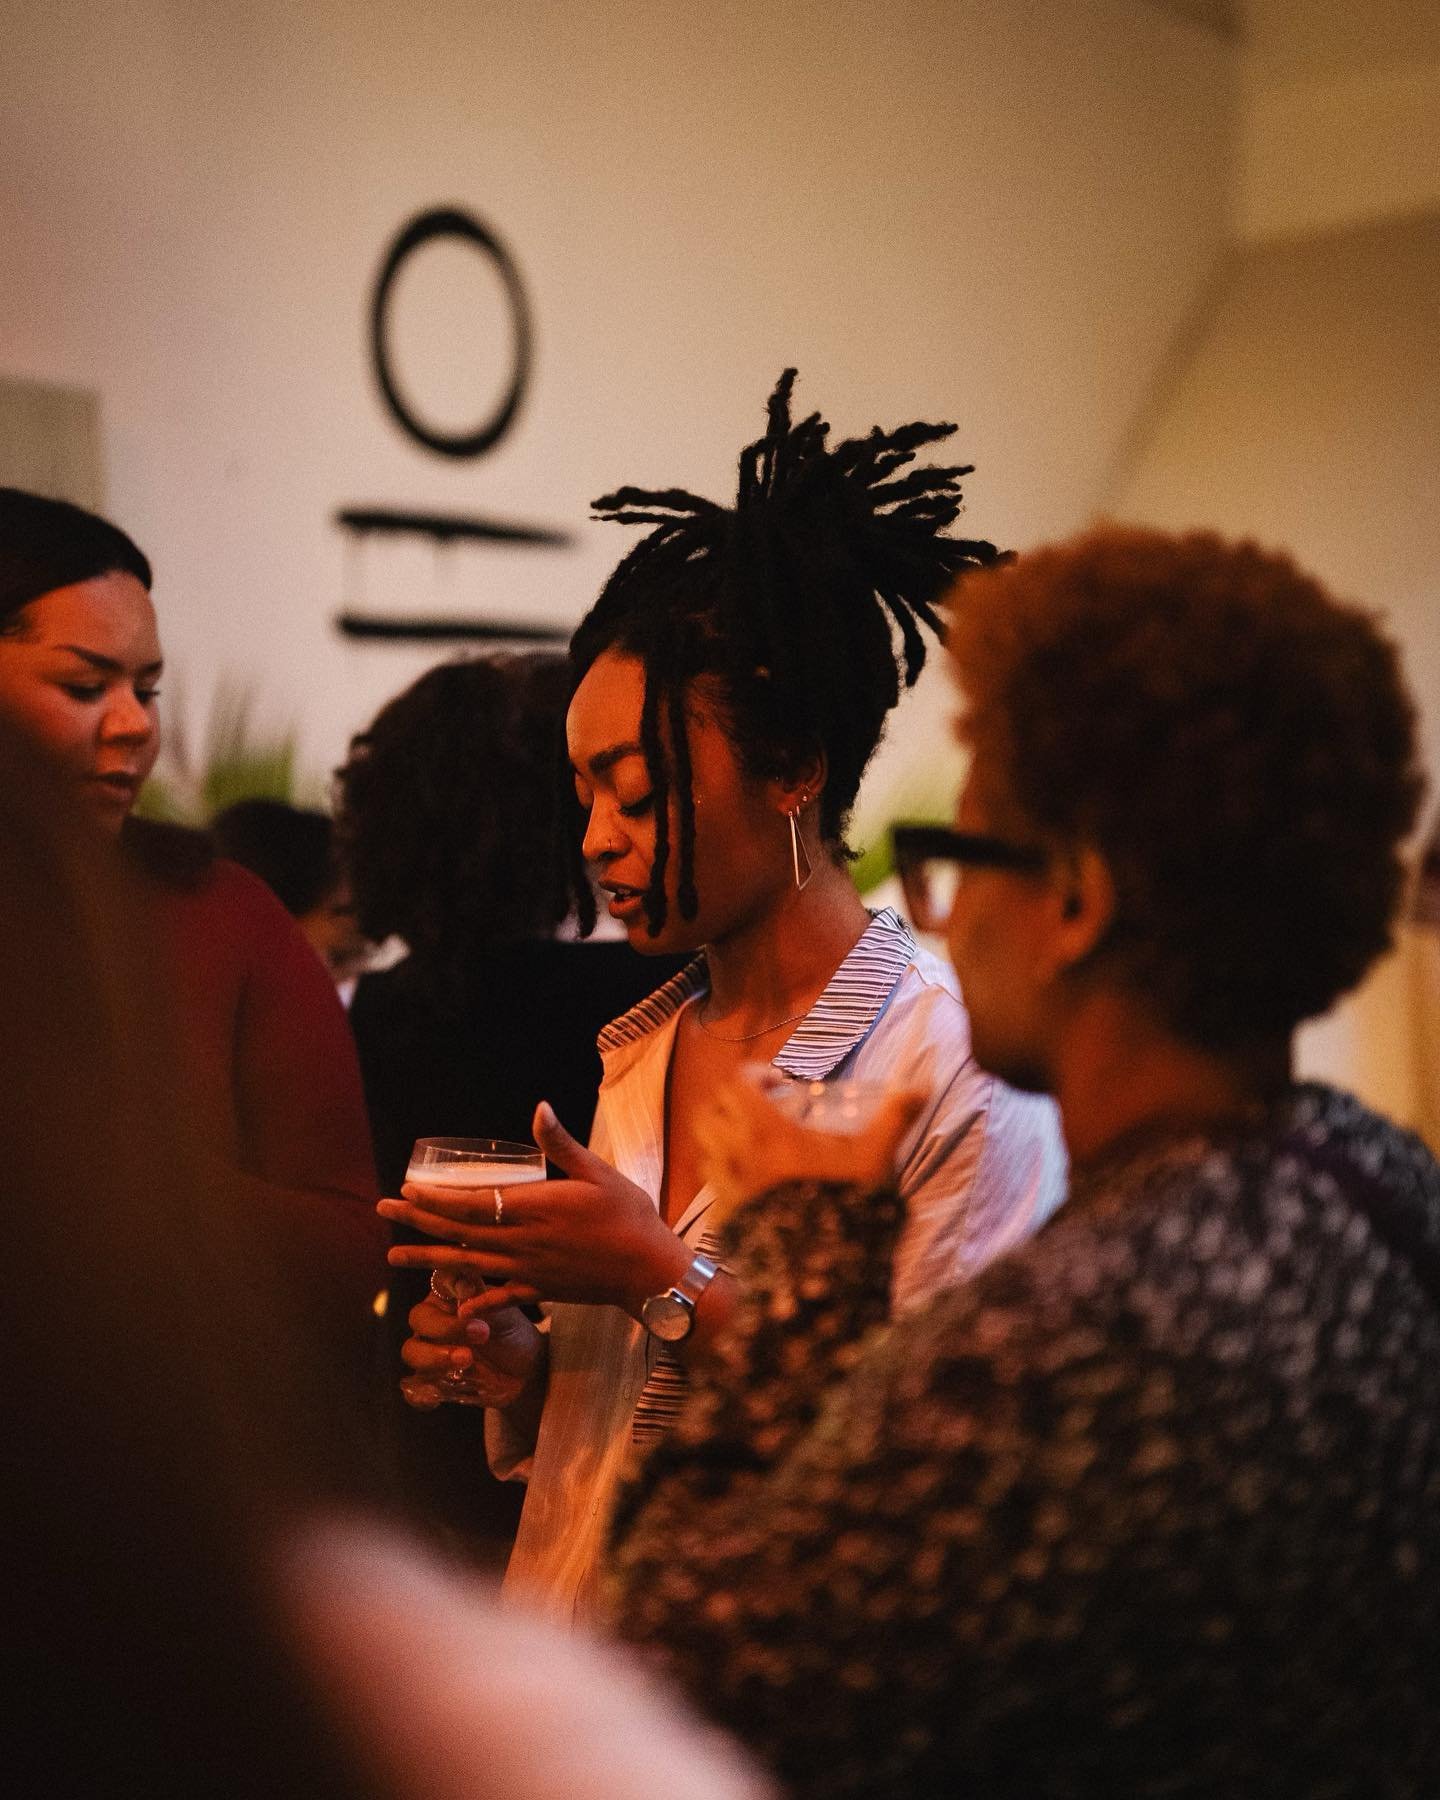 Reflecting on a great evening for Beverage Studio, a gathering with @eat.drink.kiko celebrating the art of beverage. 

Much gratitude to all who came together to make the evening so full! 

Building intentional community and co-creating experiences t